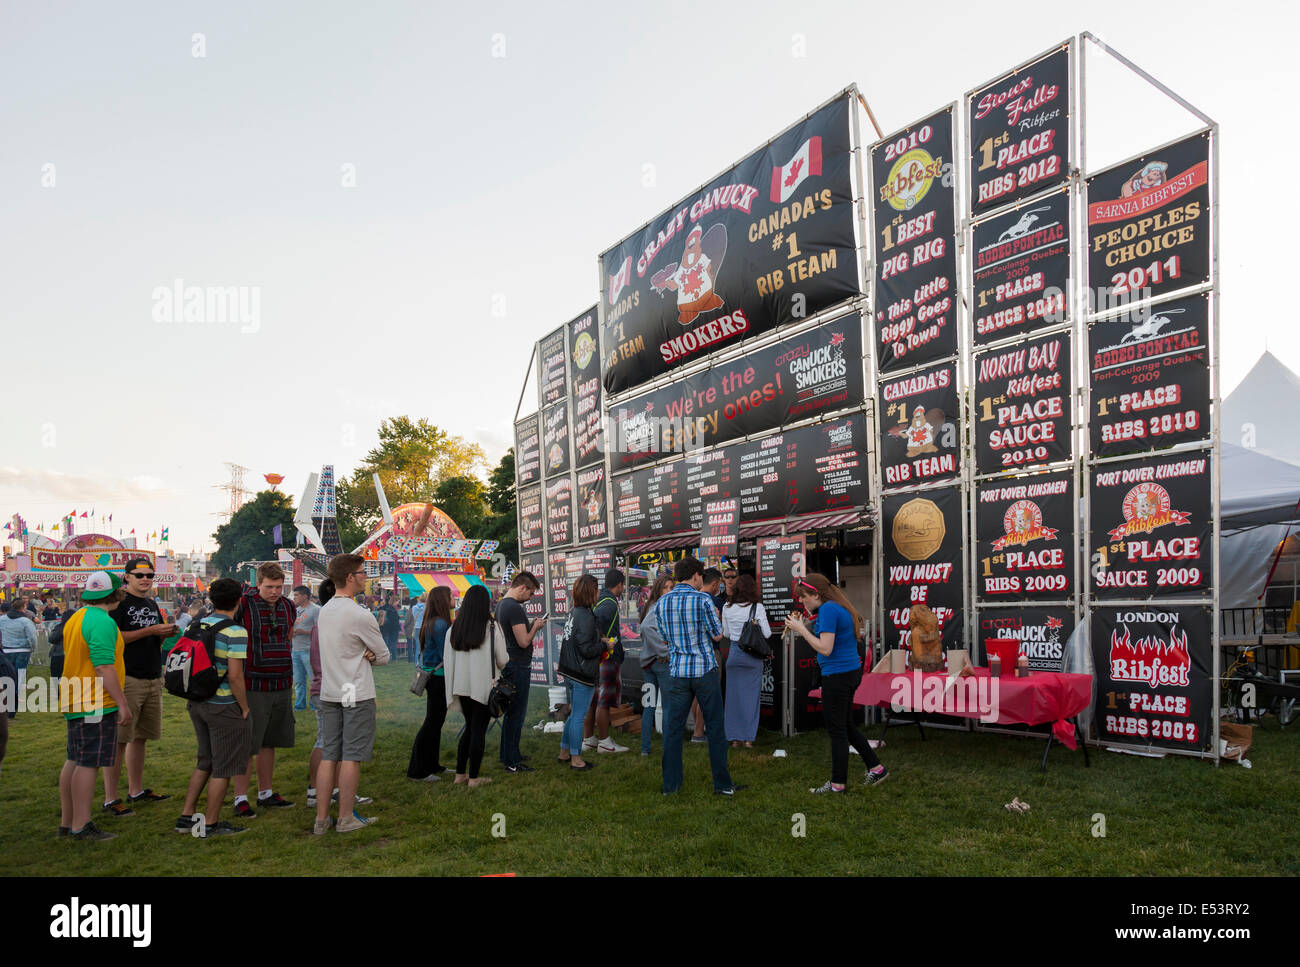 A 'Crazy Canuck Smokers' food stand at the 'Sound of Music Festival' at Spencer Smith Park in Burlington, Ontario, Canada. Stock Photo